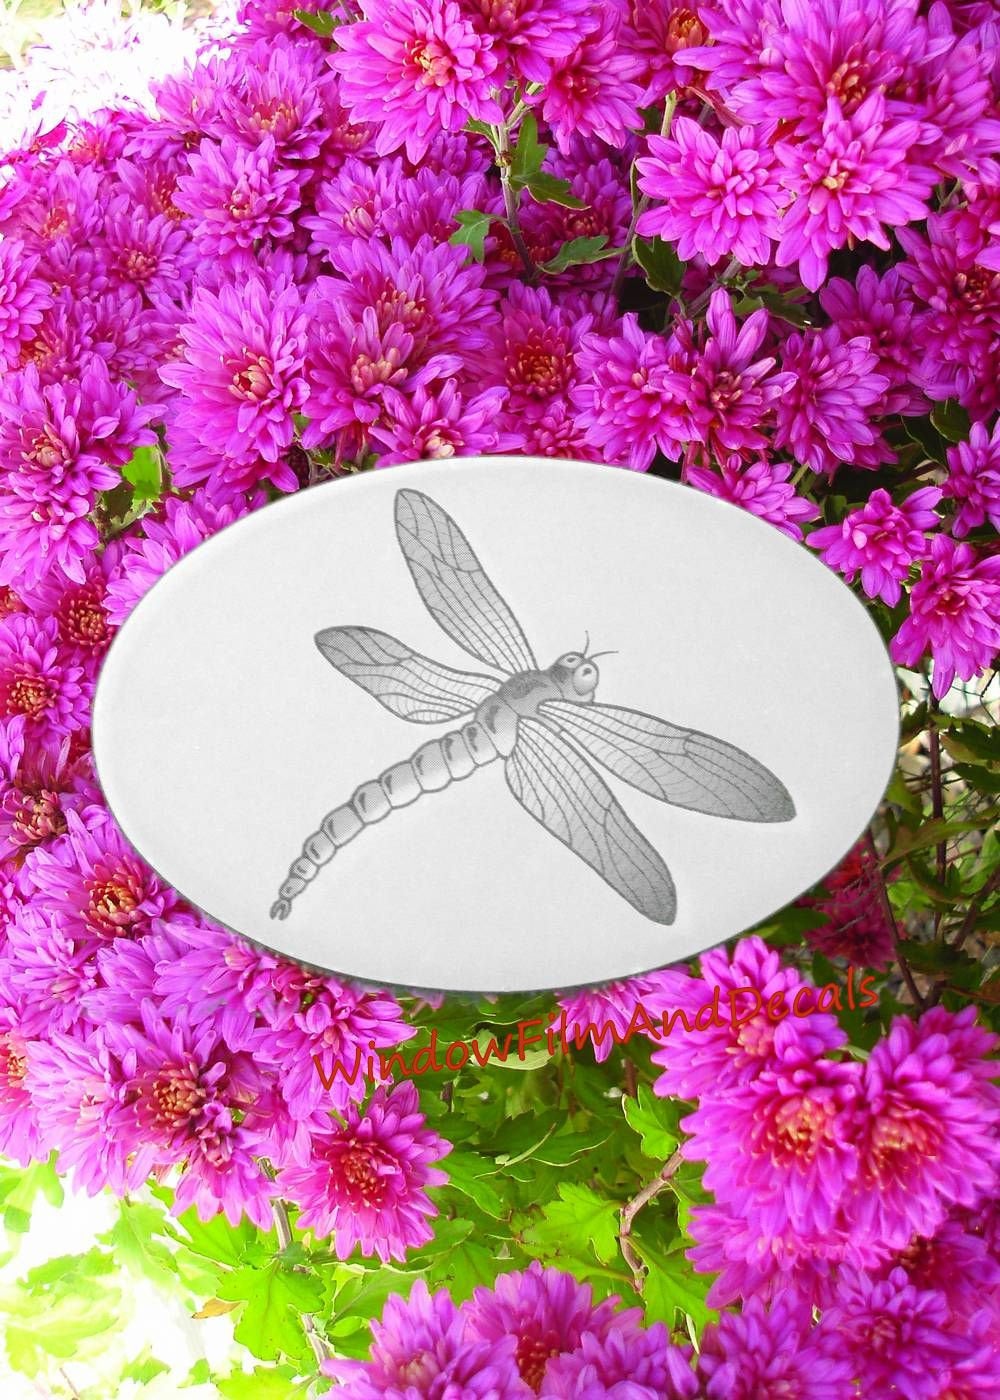 Dragonfly Oval Static Cling Window Decal 6" x 4" - White w/Clear Design